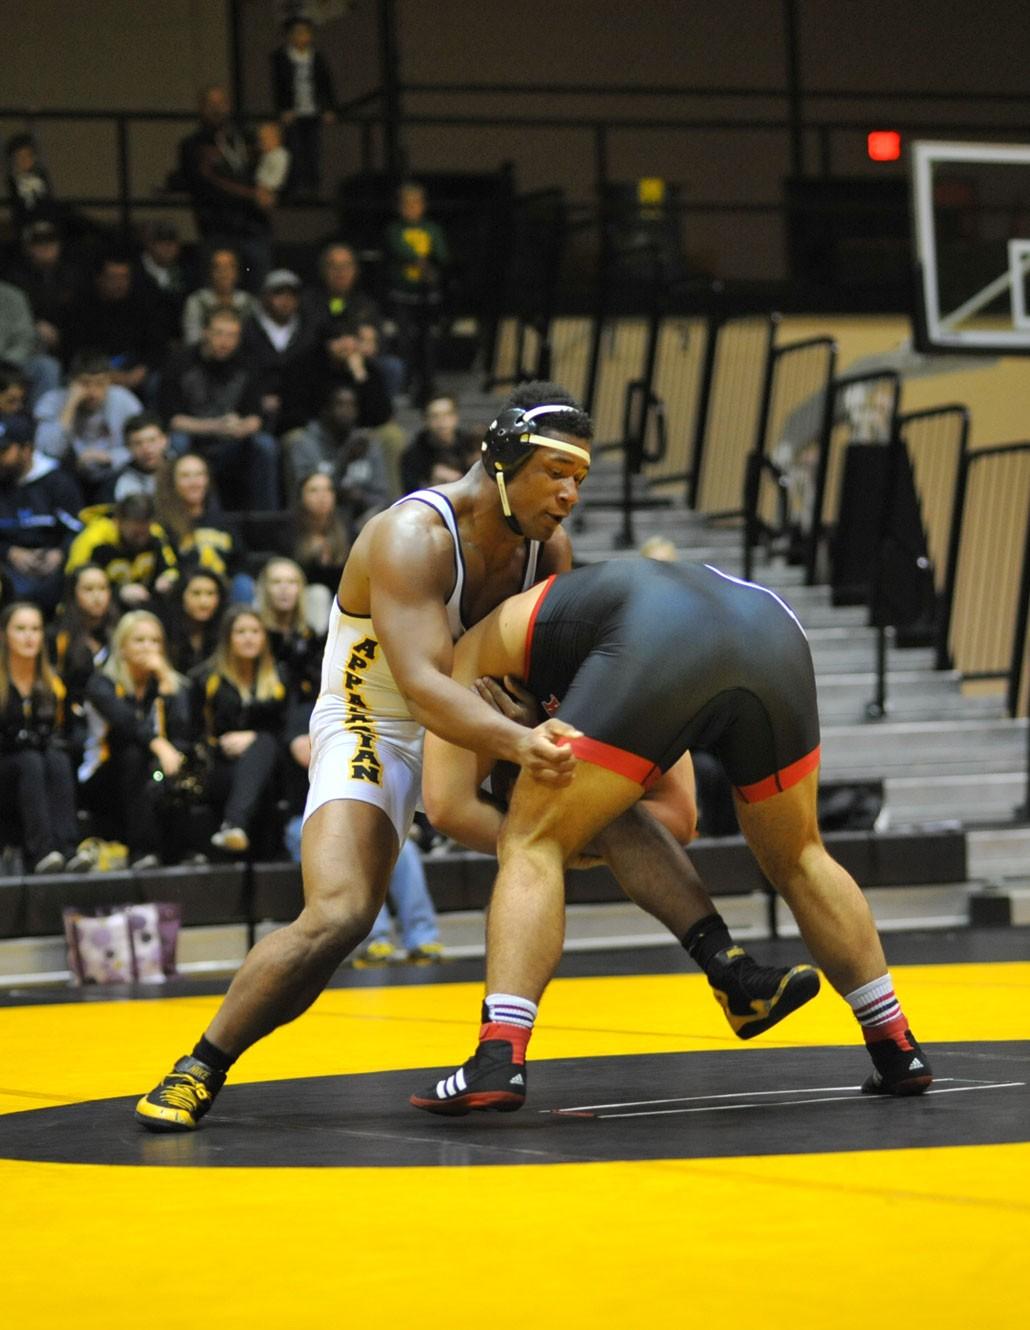 Denzel Dejournette is the sixth best wrestler in his NCAA weight class and is currently 23-2 this season. Photo courtesy Dave Mayo/App State Athletics.